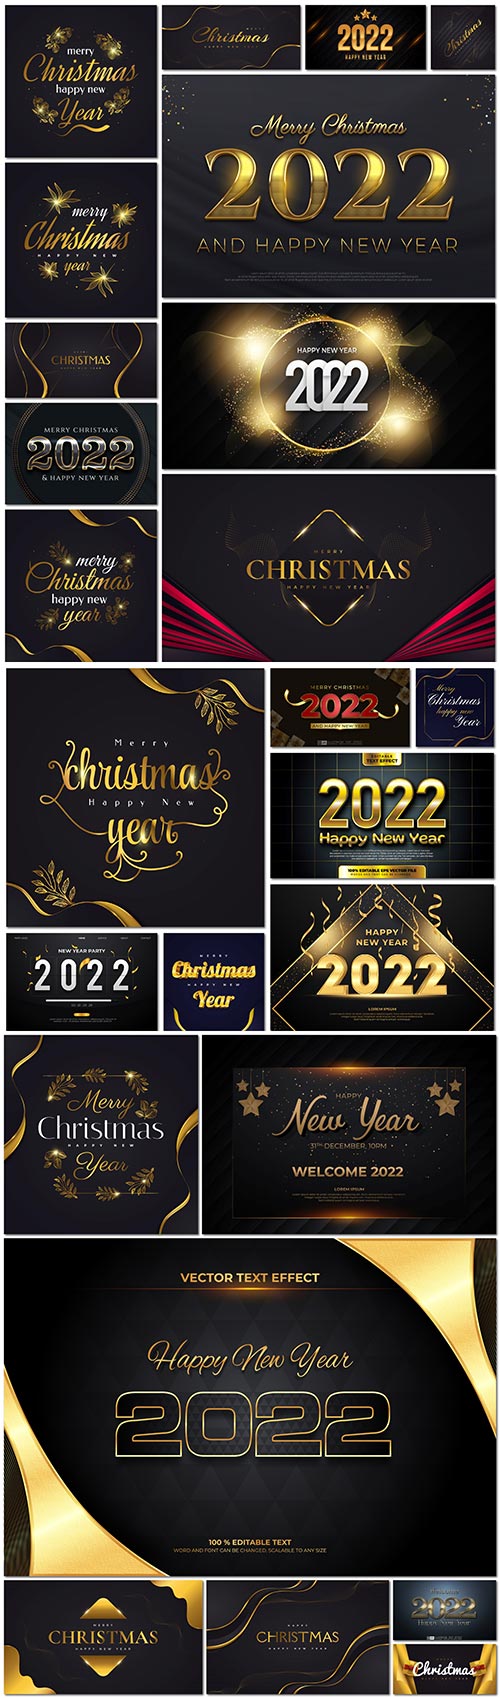 Merry christmas and happy new year 2022 editable vector text effects vol 30